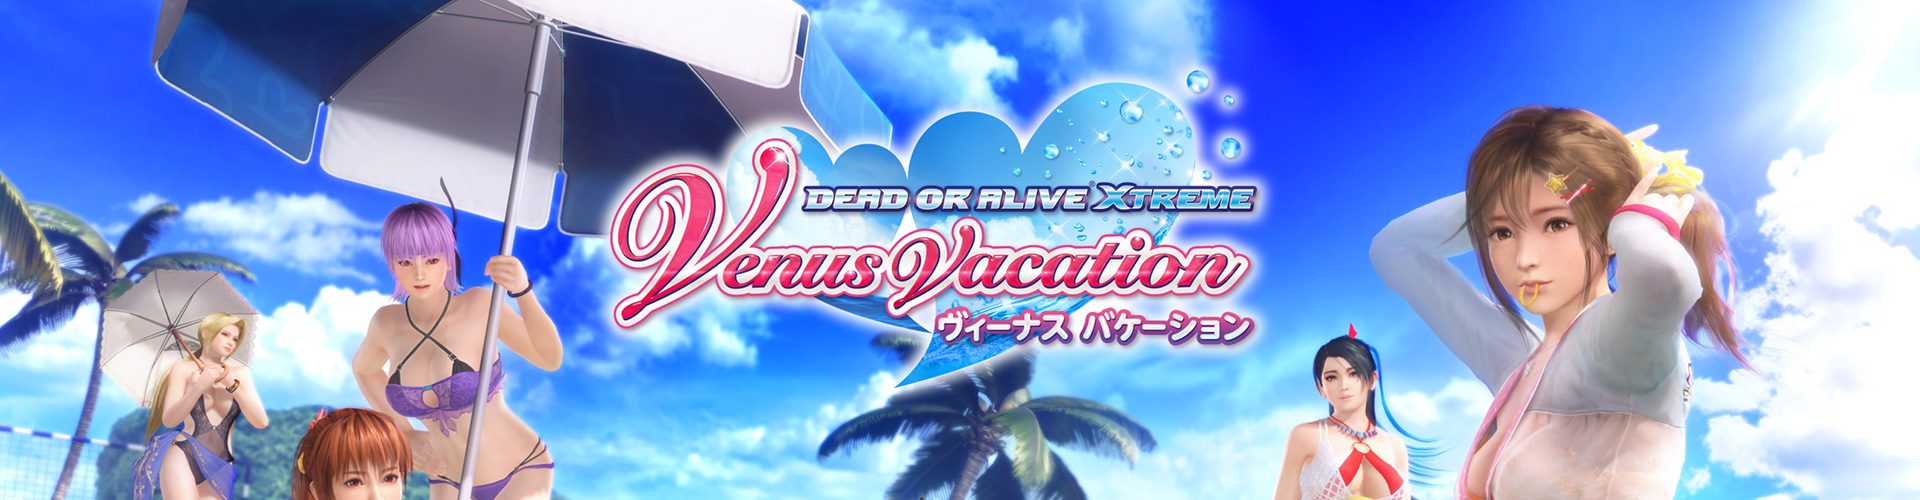 DOAX3 Fortune / Scarlet 完全制覇への道 with Venus Vacation